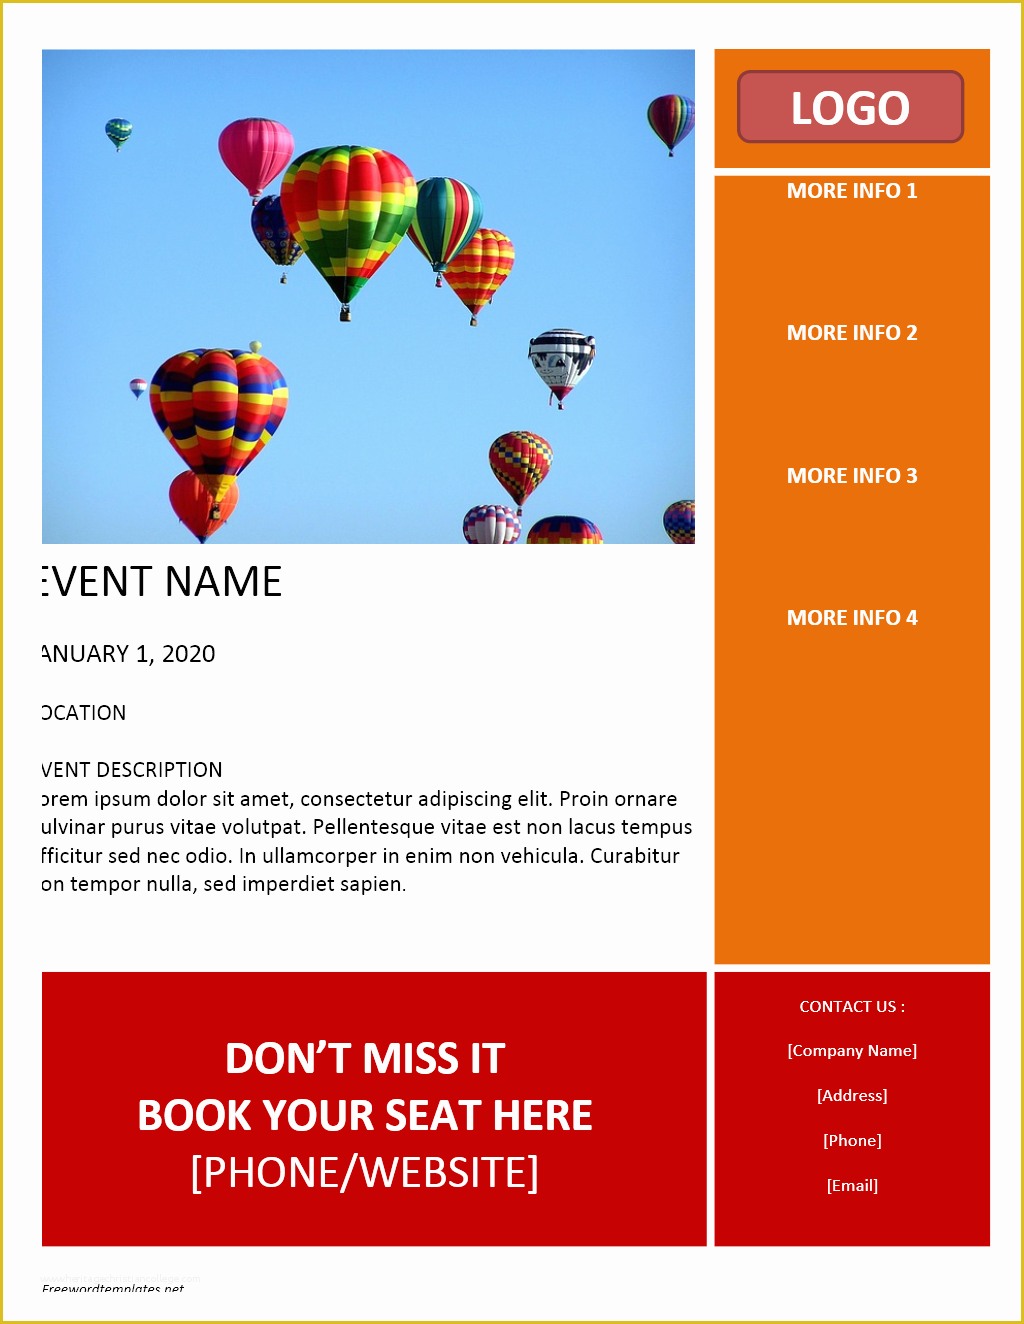 Free Print Ad Templates Of 8 Free Flyer Templates for Word Bookletemplate